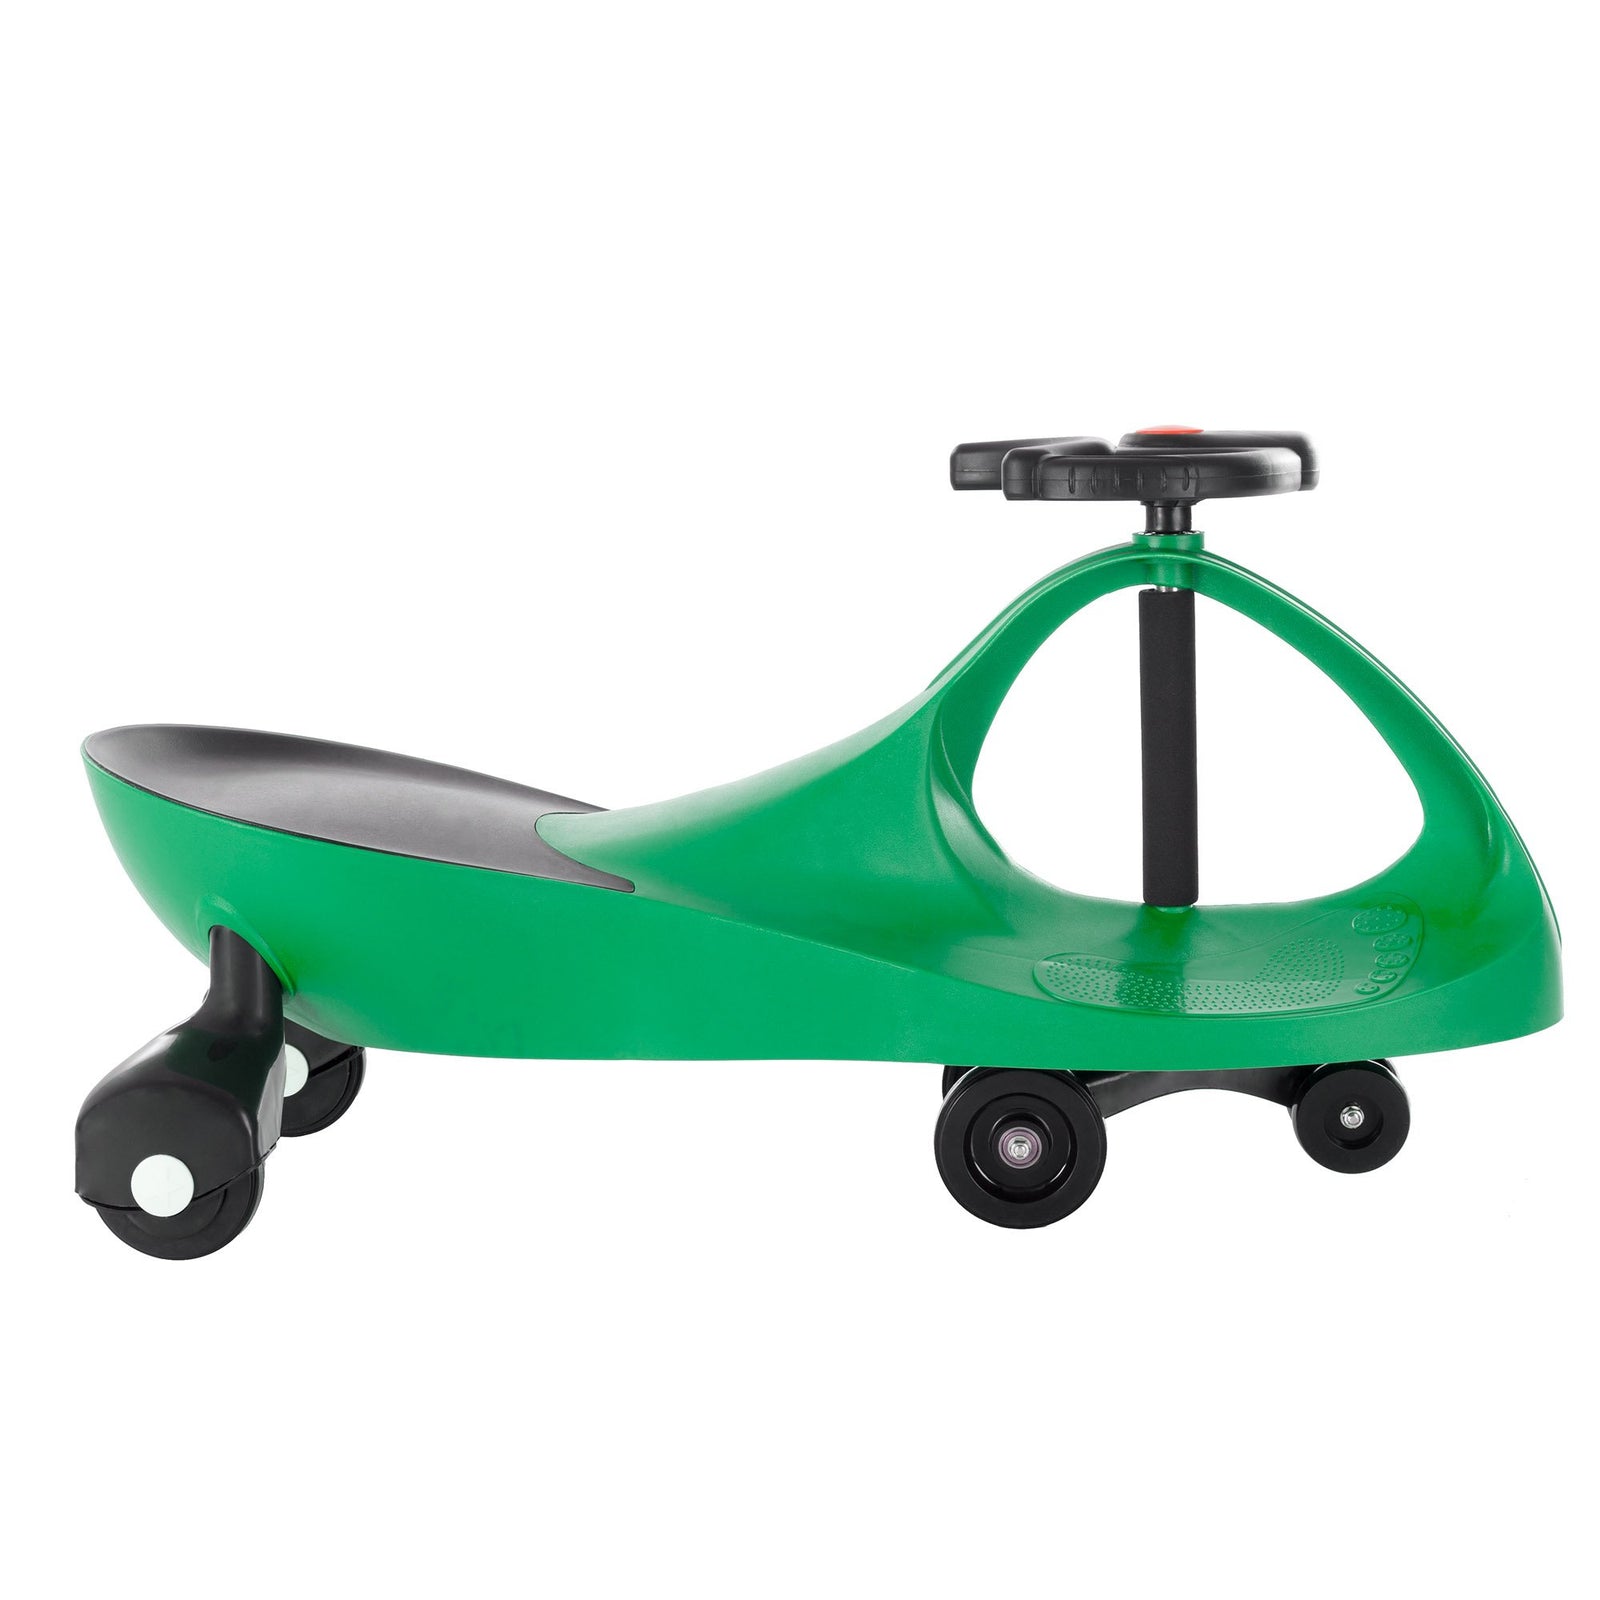 Wiggle Car Ride On Toy – No Batteries, Gears or Pedals – Twist, Swivel, Go – Outdoor Ride Ons for Kids 3 Years and Up by Lil’ Rider (Green)